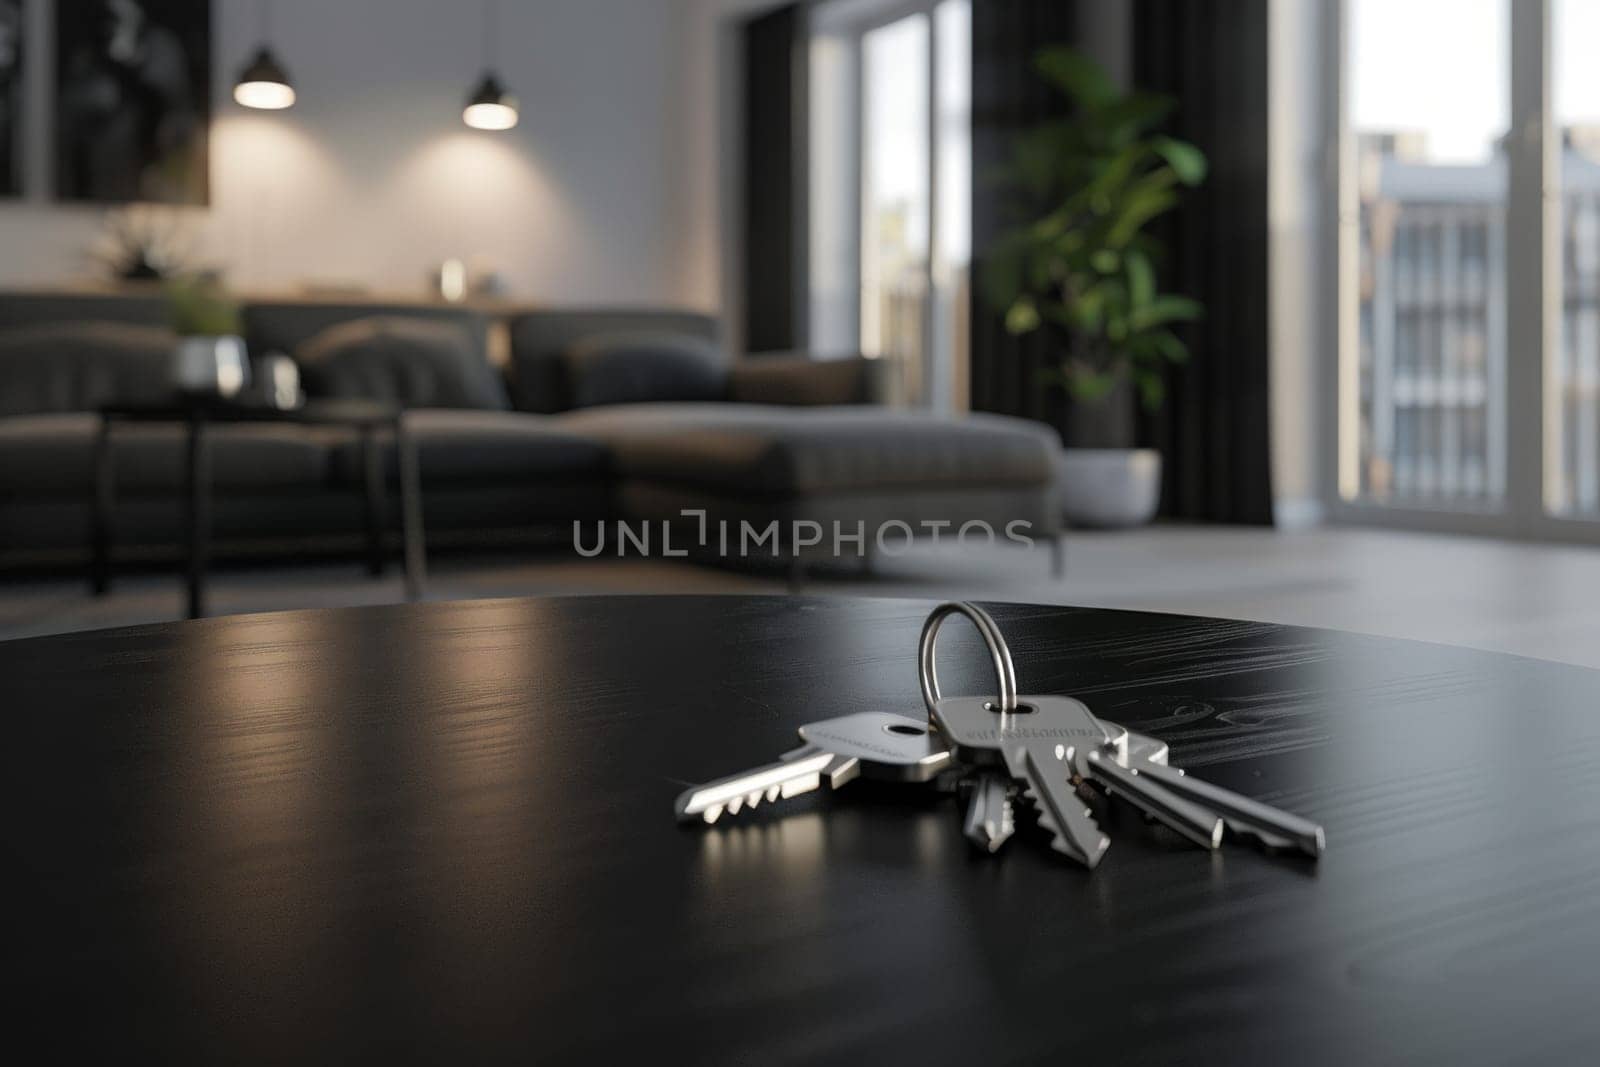 Keys on the table in new apartment or hotel room. Mortgage, investment, rent, real estate, property concept by papatonic